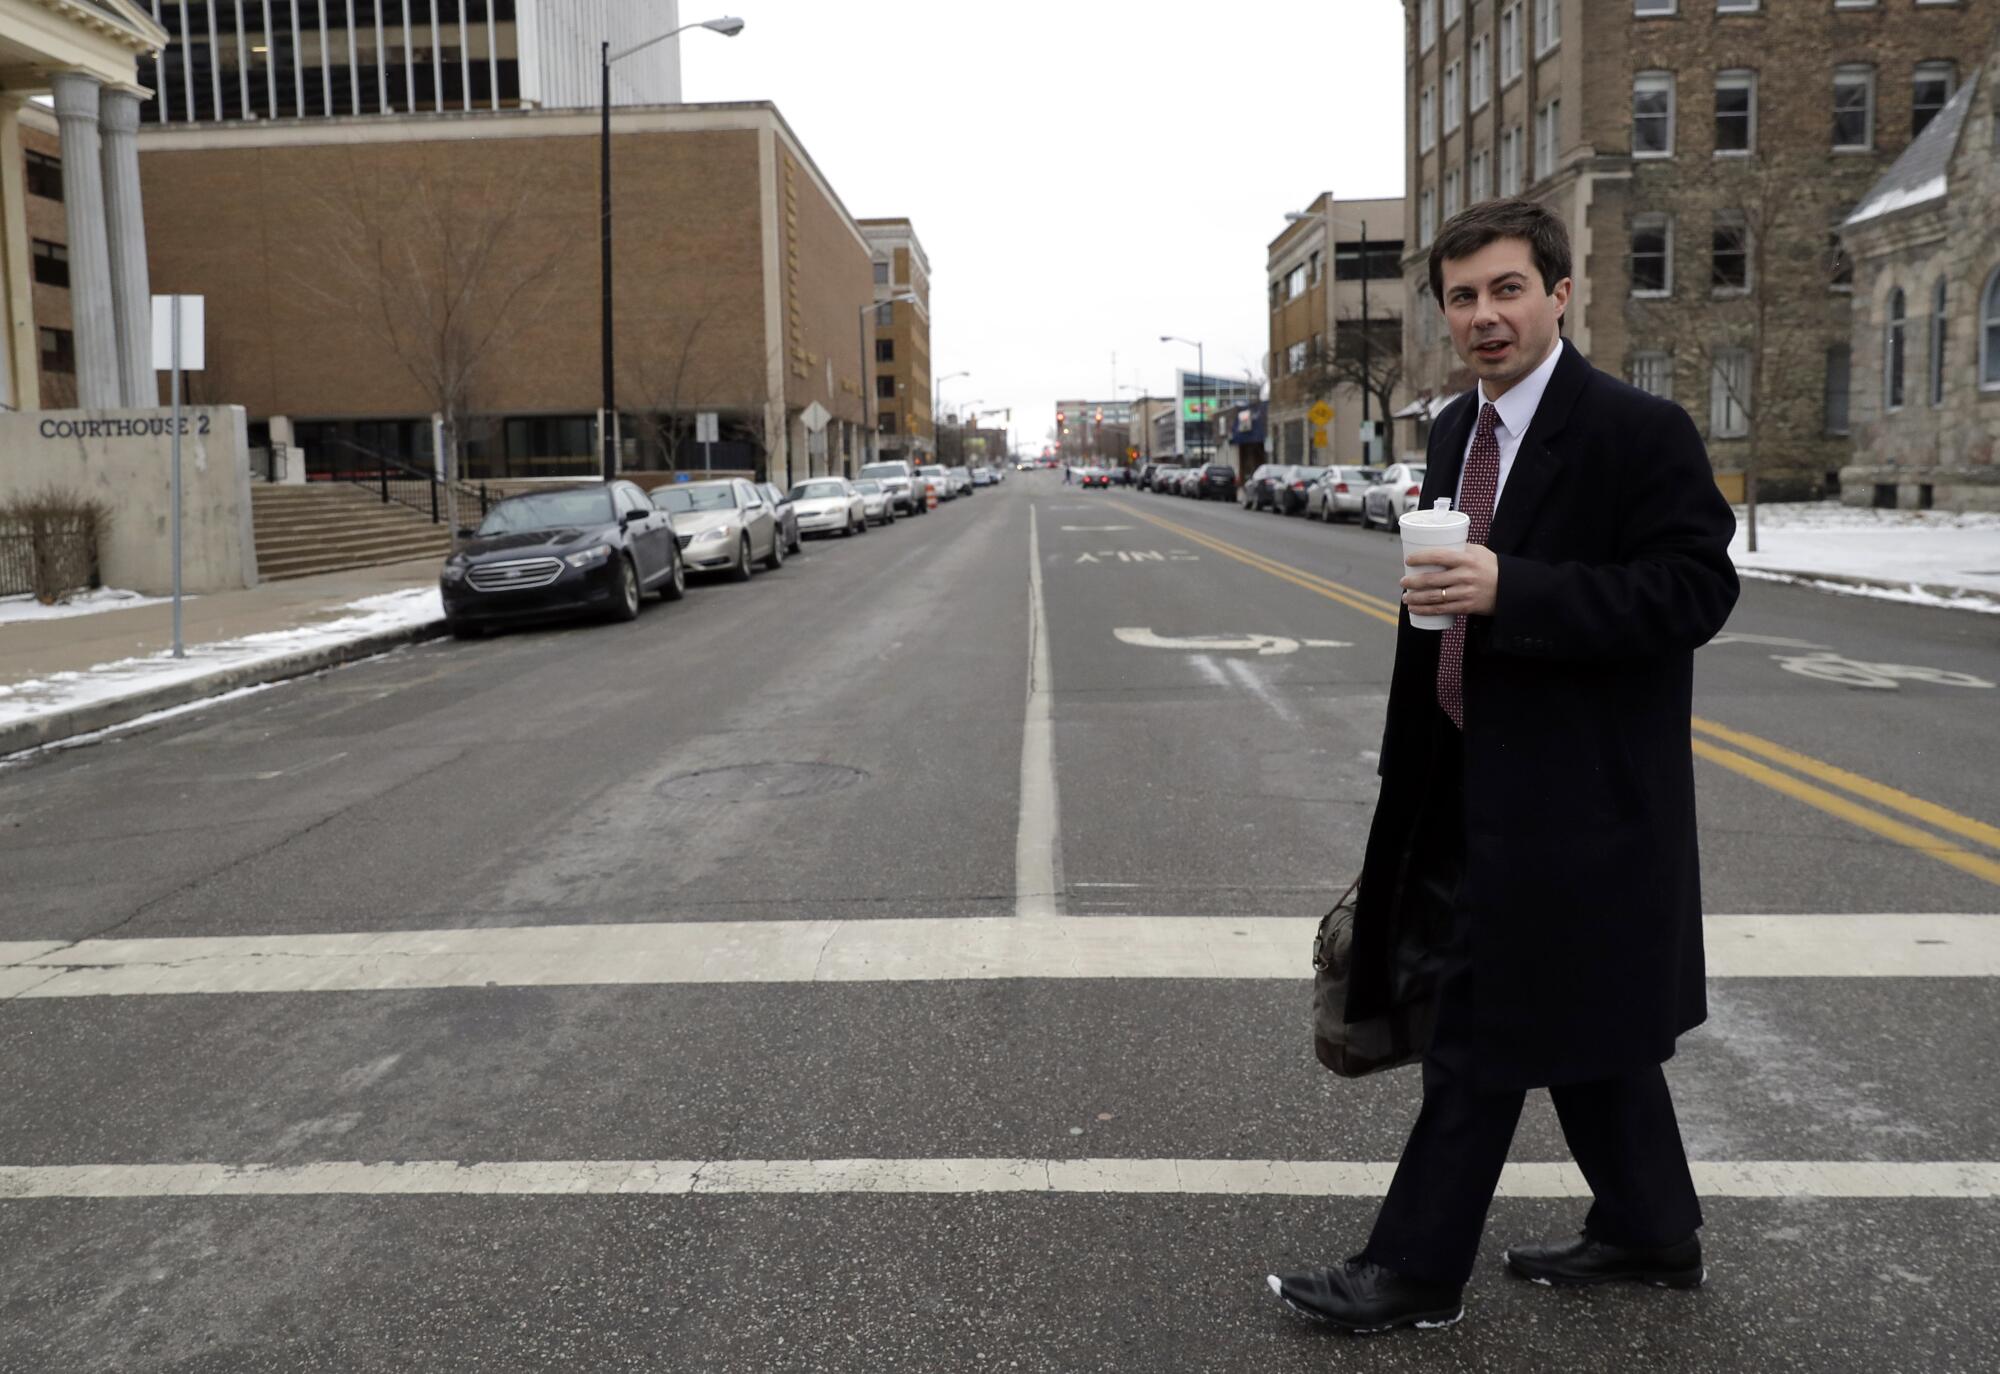 Then-Mayor Pete Buttigieg in downtown South Bend, Ind., in January 2019.  